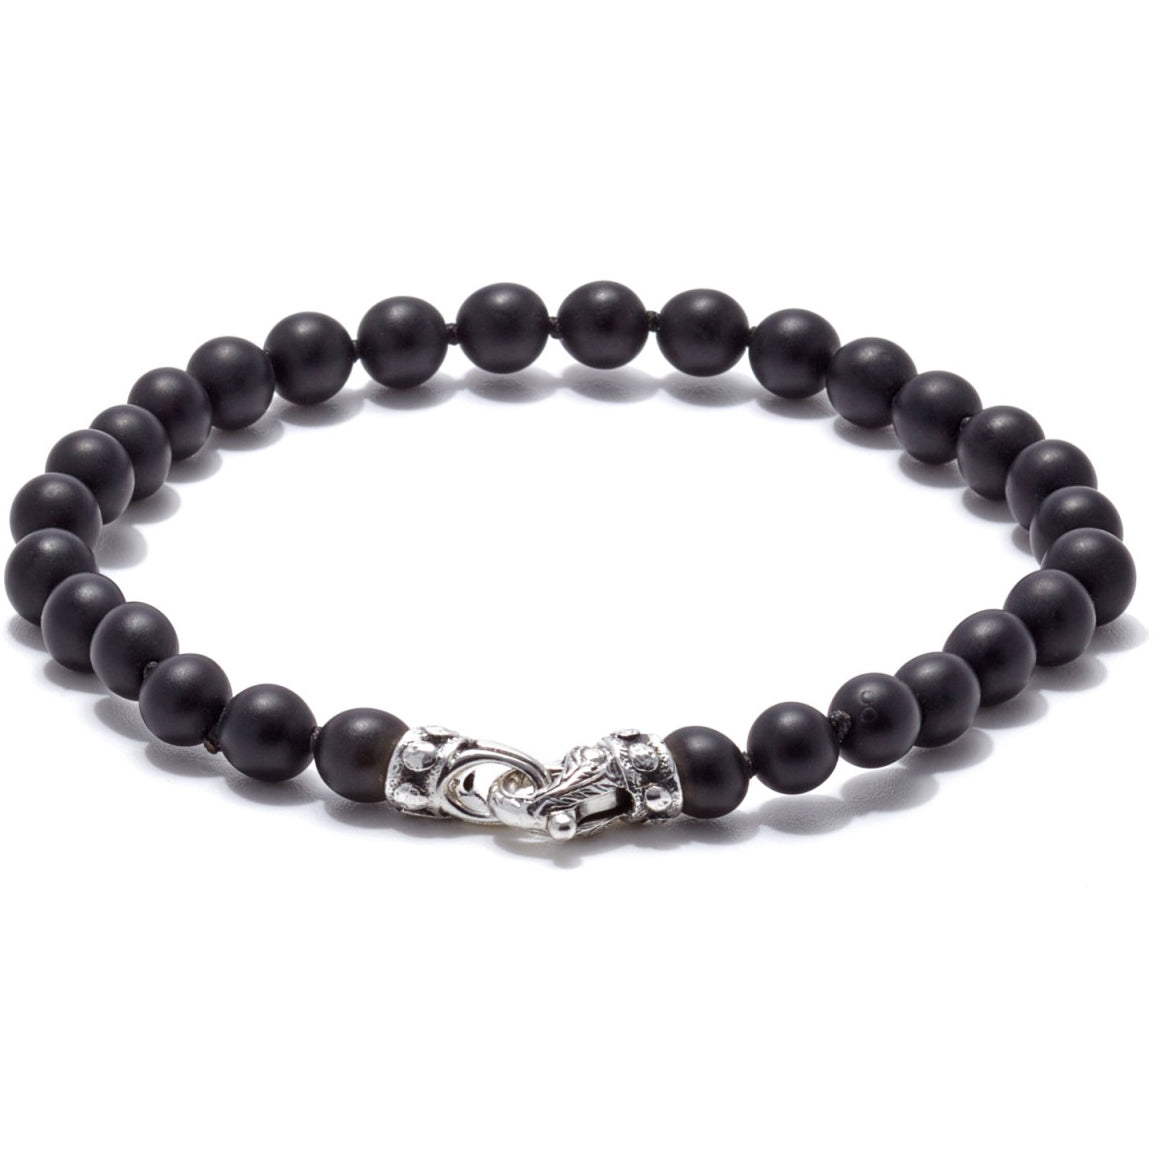 Scott Kay Matte Black Onyx Bracelet Men's Beads Collection with Sterling Silver Clasp, 6mm, 8.5 inches